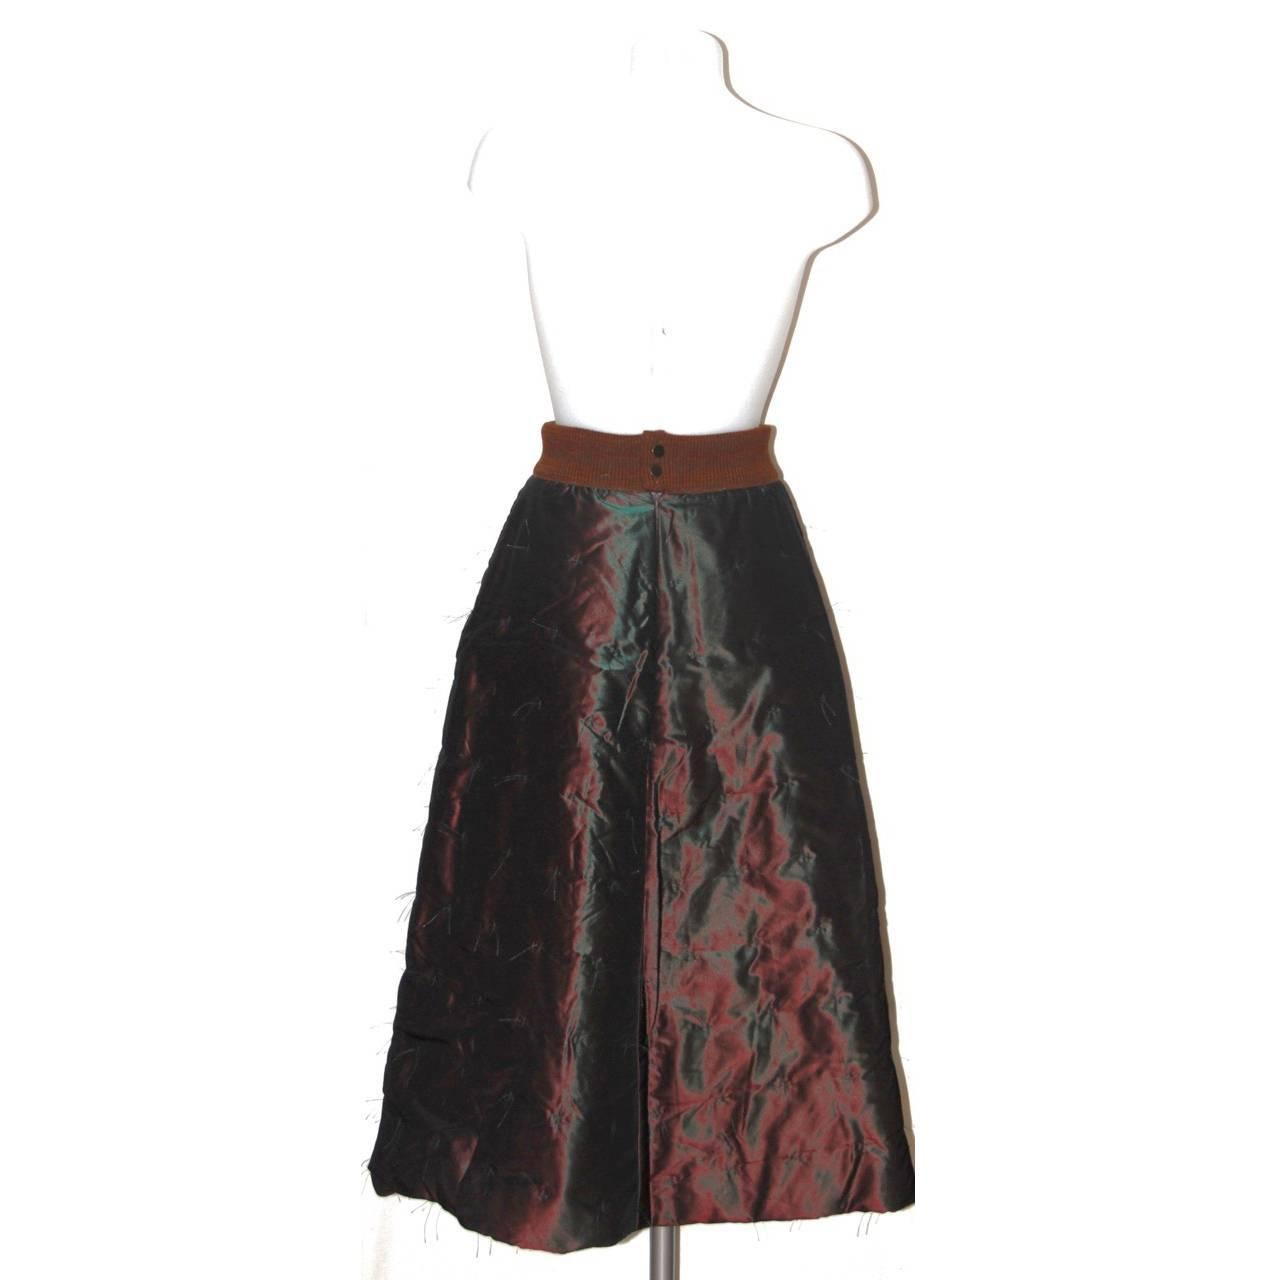 This standout A-line skirt from Chanel is the perfect piece to get in the wardrobe. The amazing color features an iridescent effect, brown and green. The  brown embroidered stitch details throughout give a delicate final touch. 

Collection: Fall